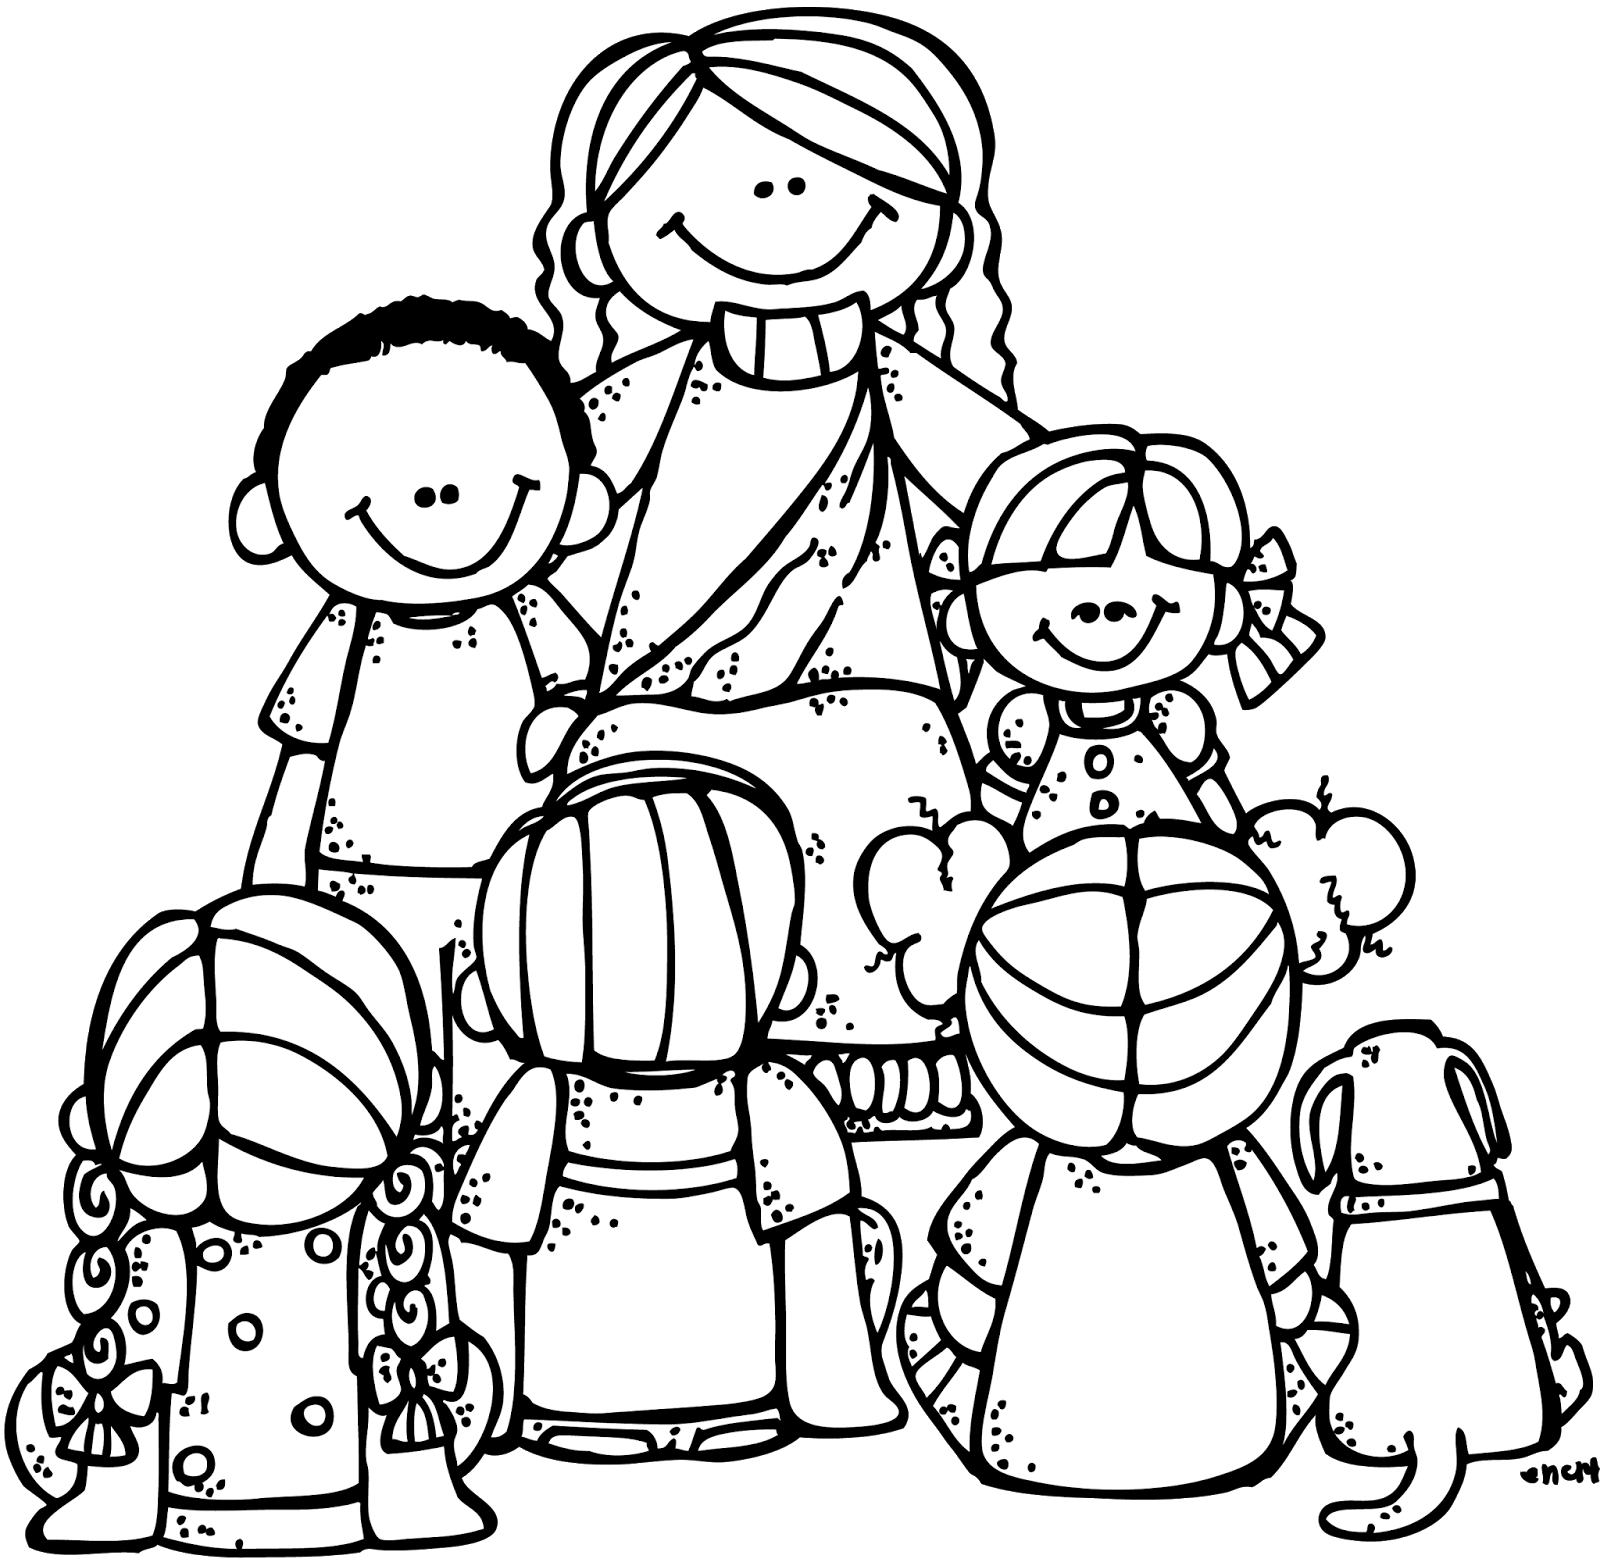 1000+ images about lds.clipart | Christmas embroidery ...